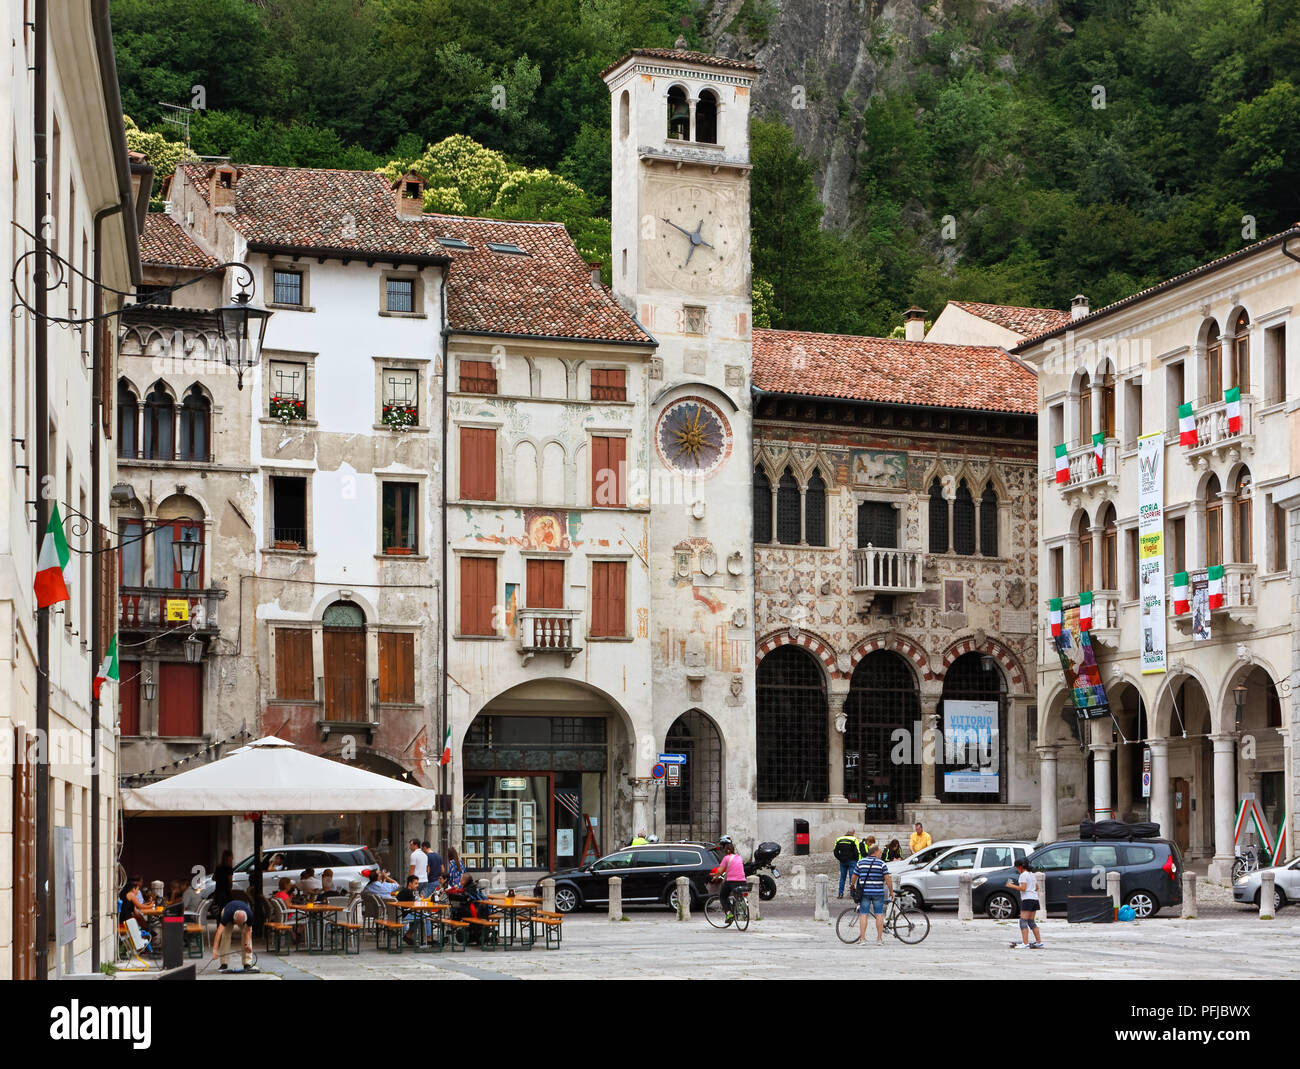 VITTORIO VENETO, Italy - July 1, 2018: Piazza Flaminio in the historic district of Serravalle, with the Loggia and the civic tower Stock Photo